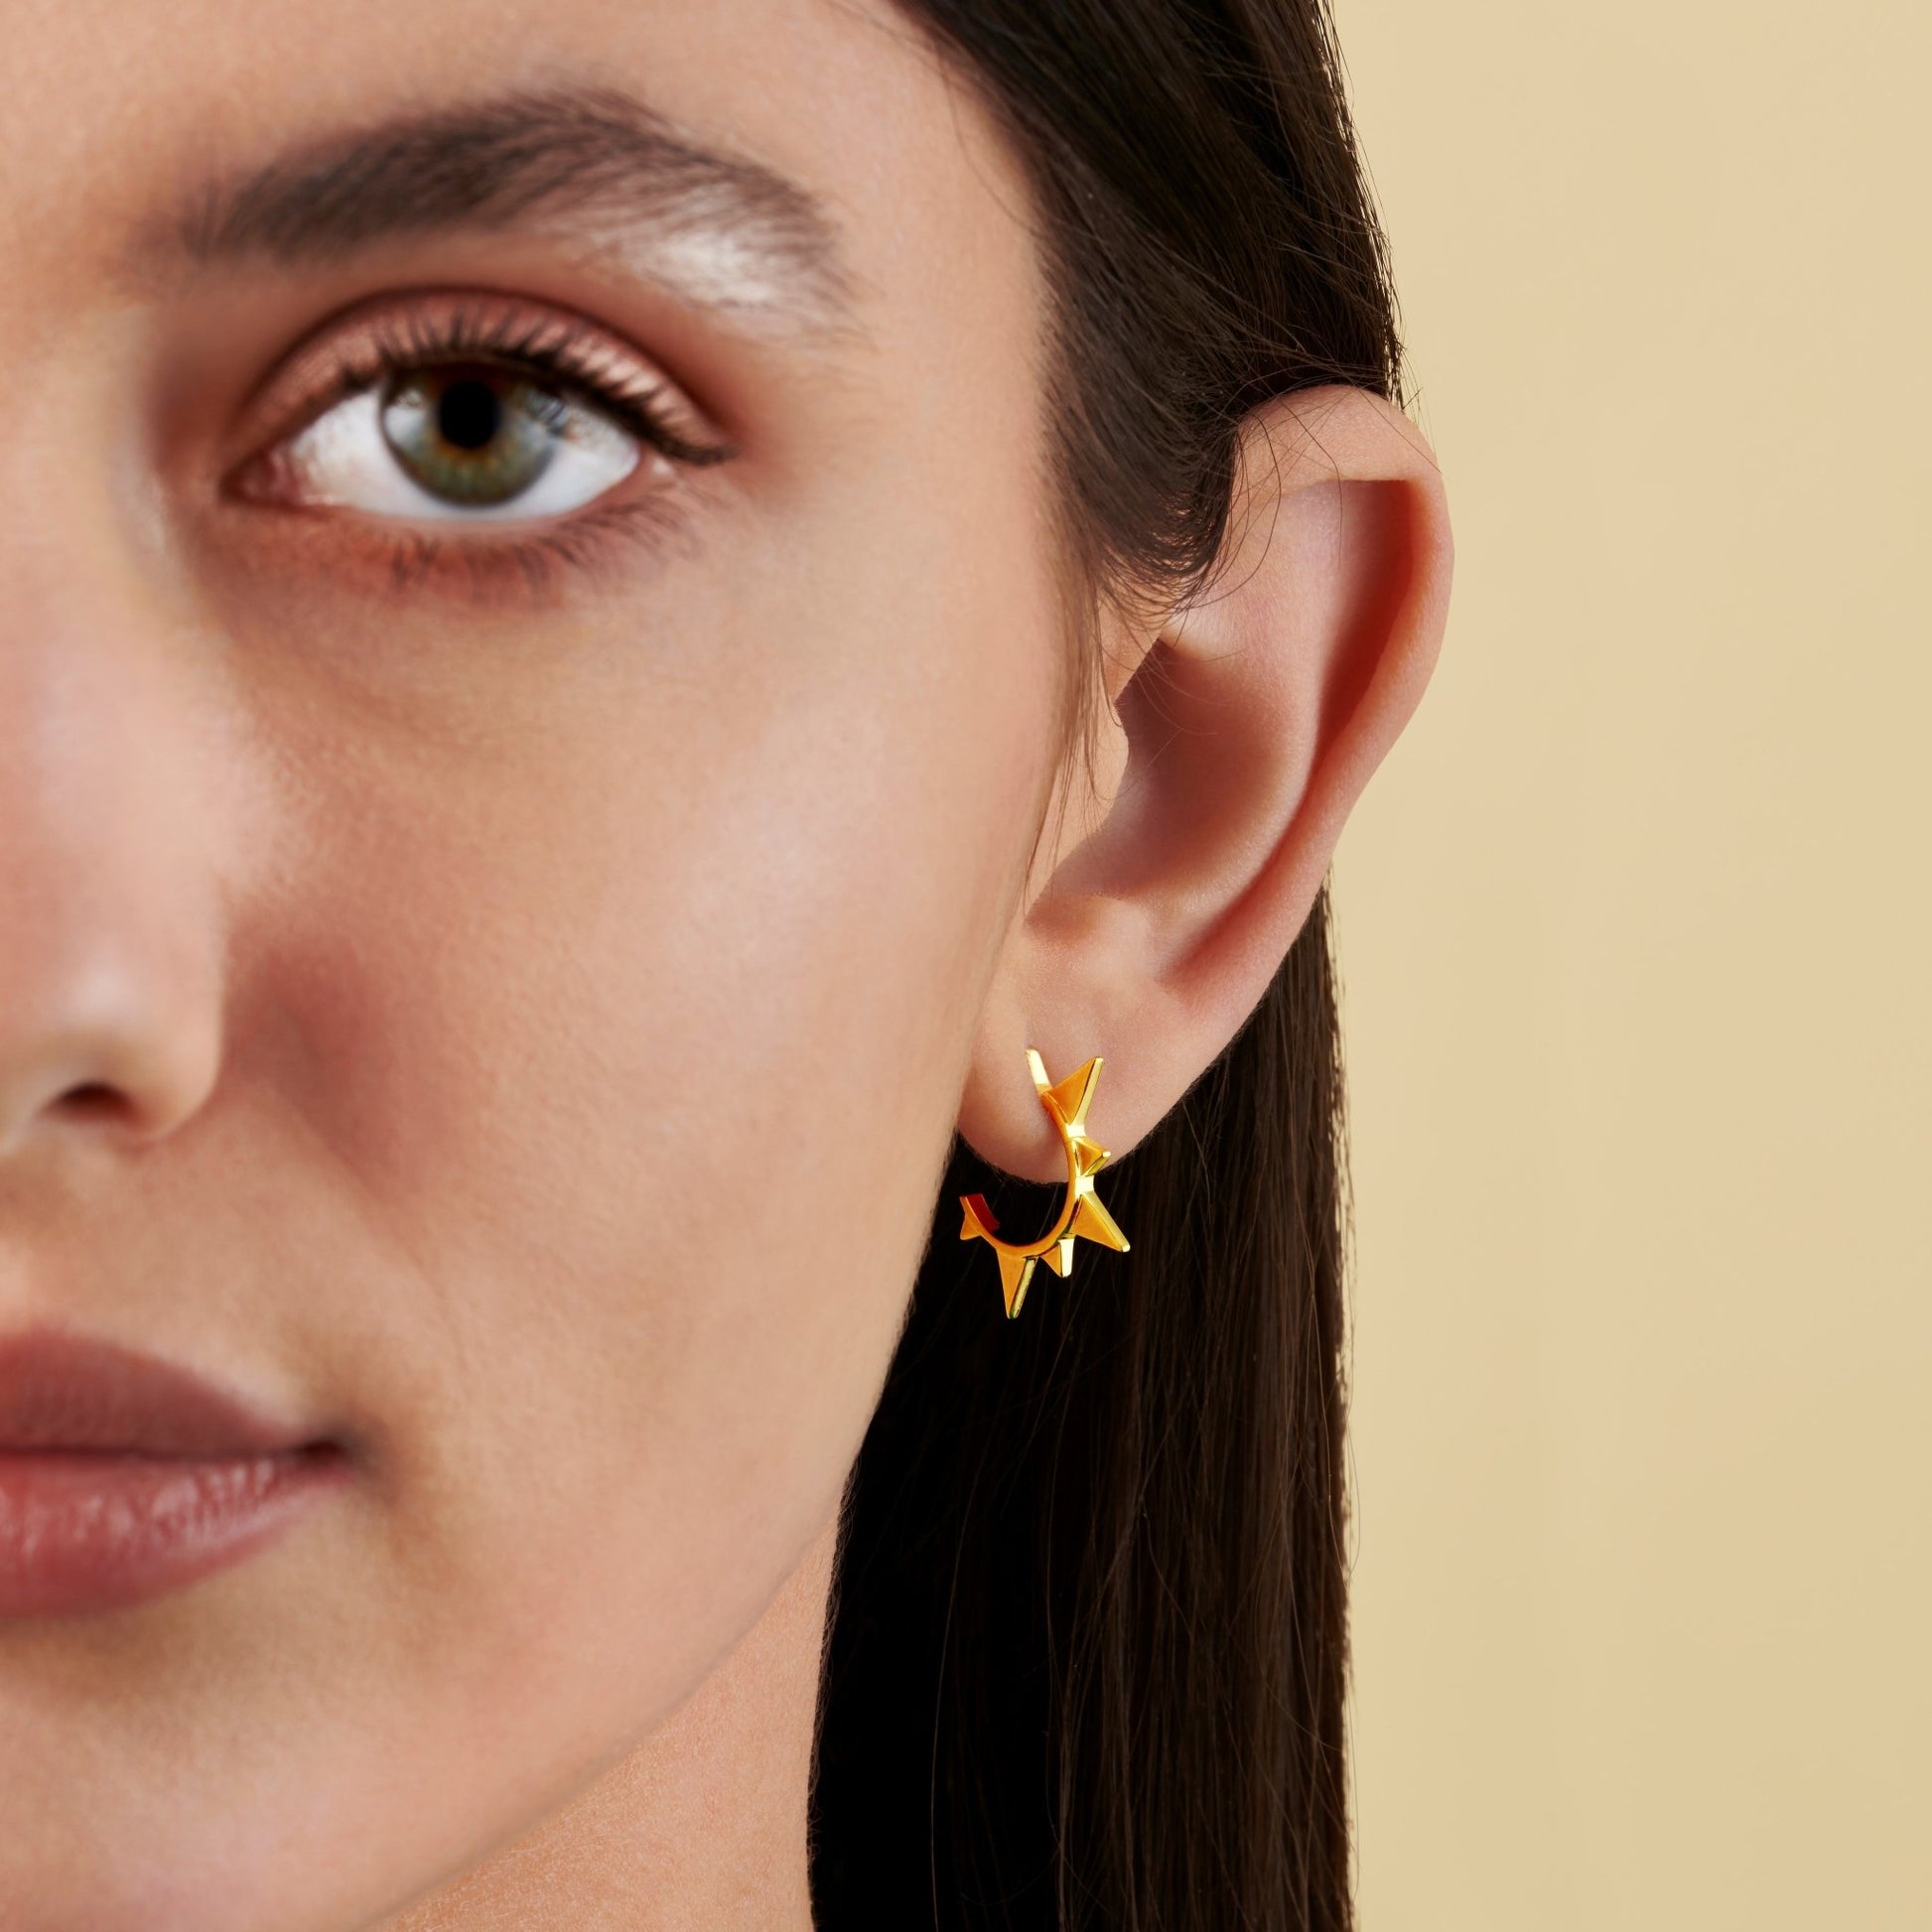 SPIKE COMPASS HOOPS IN GOLD VERMEIL - Fool's Gold Jewellery